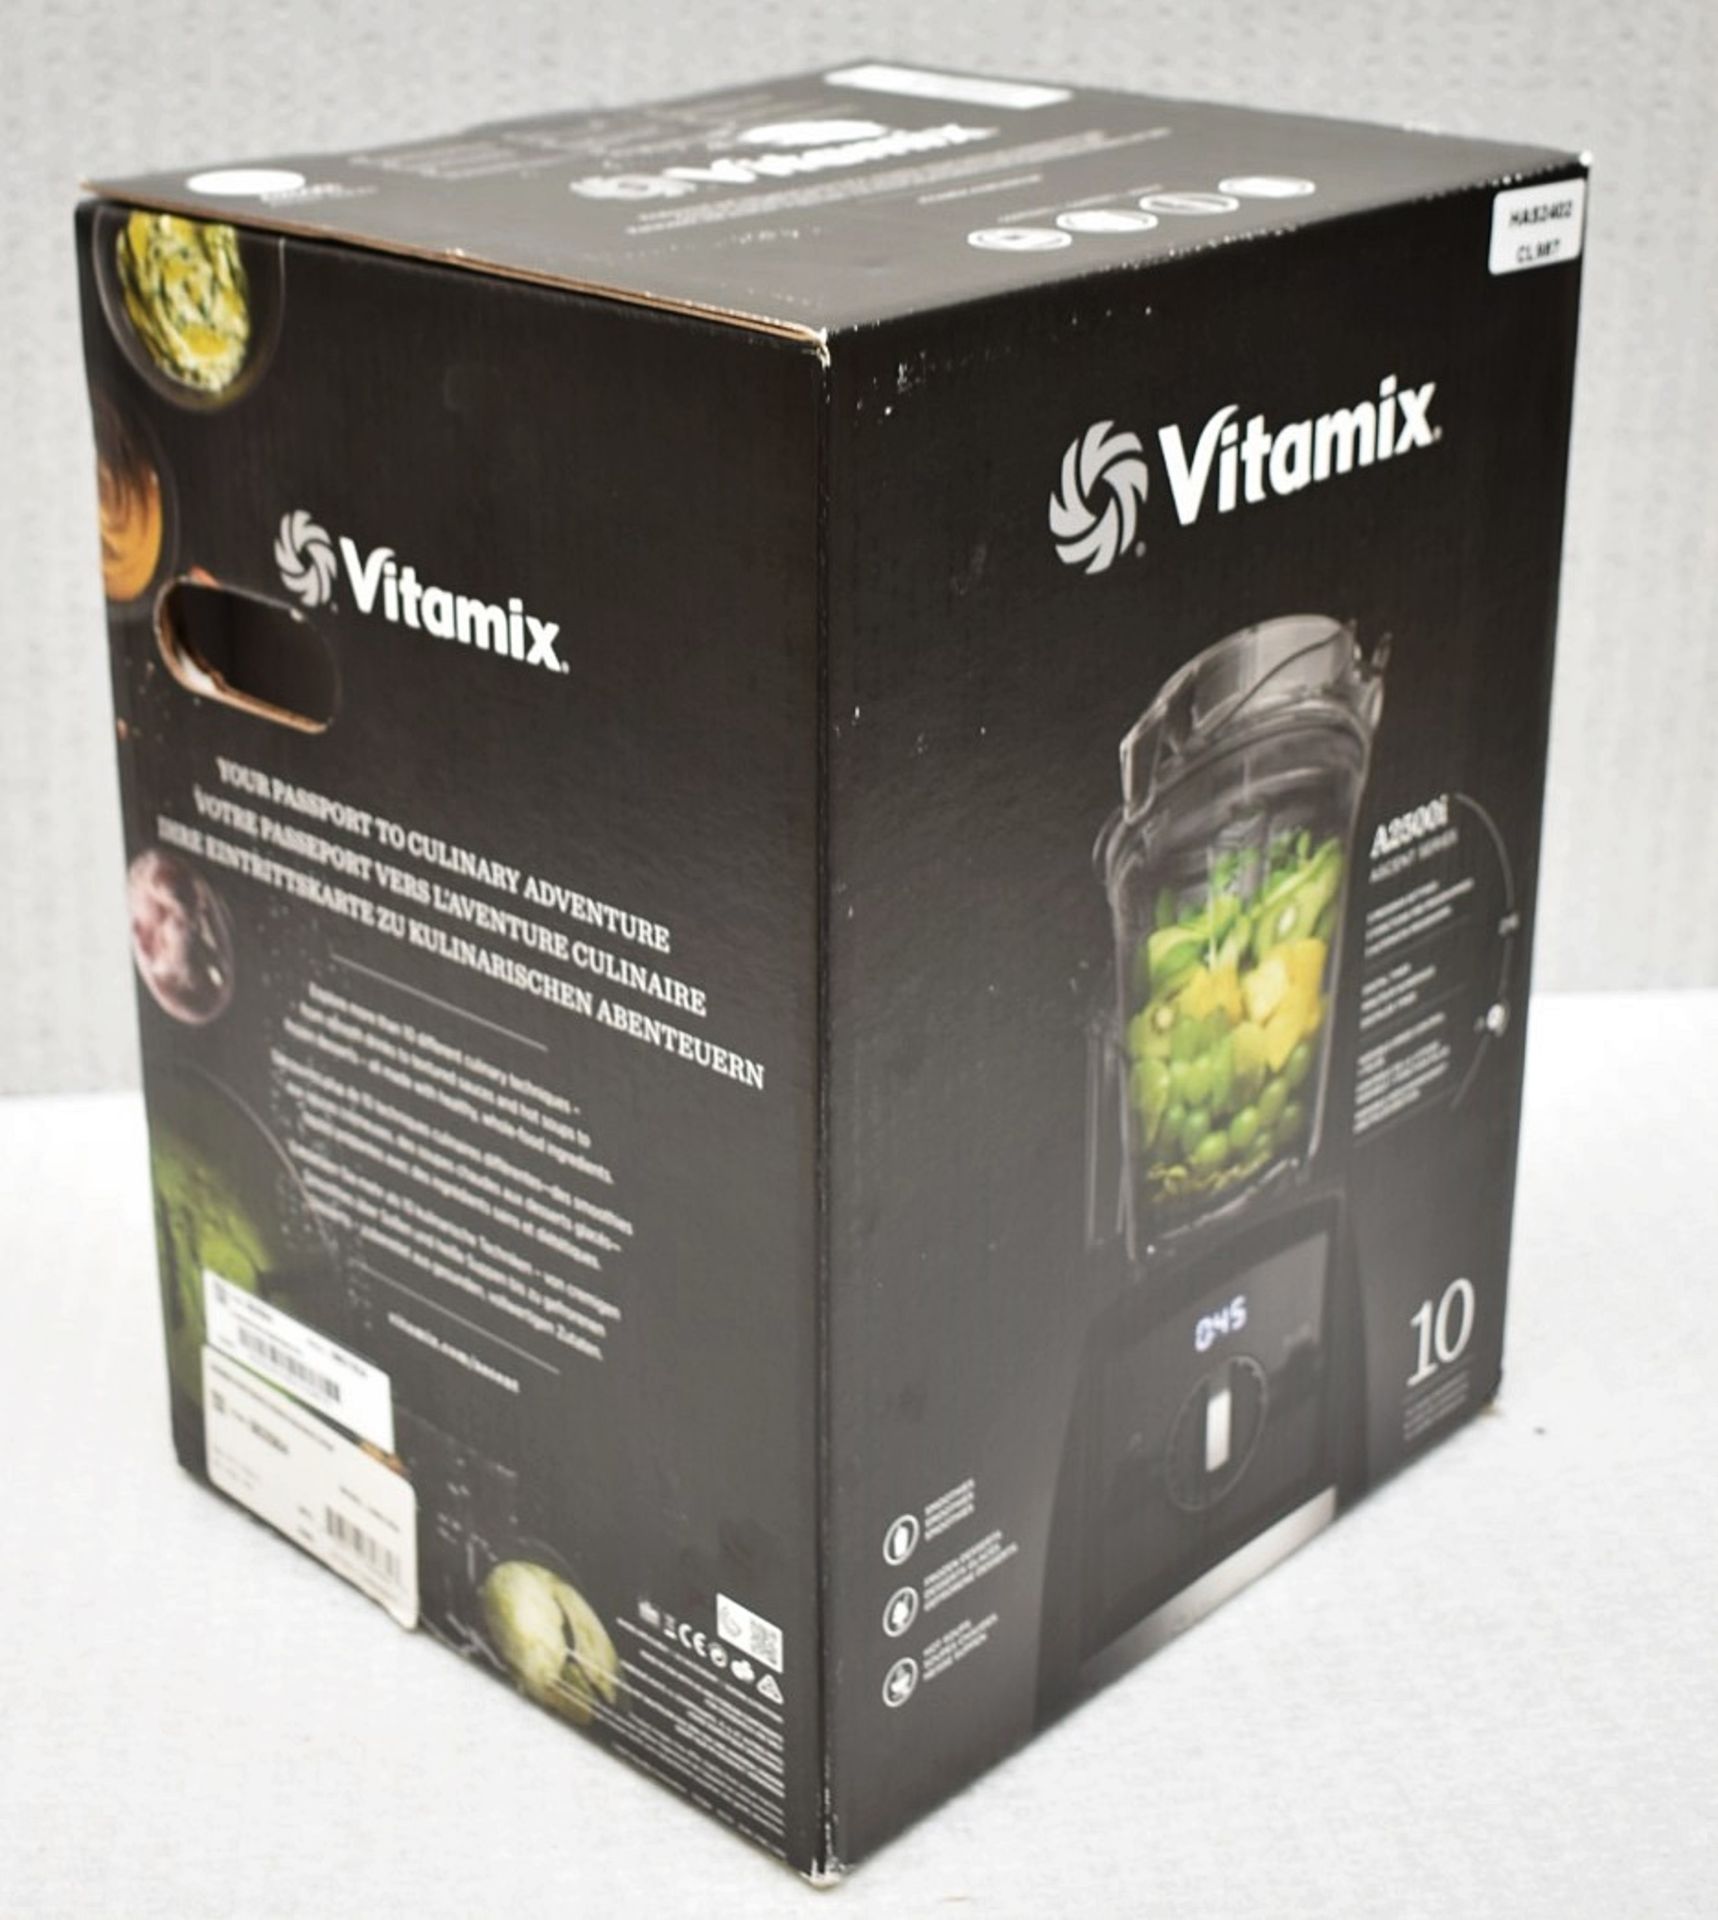 1 x VITAMIX A2500i Ascent Series Blender In White - Sealed Boxed Stock - RRP £599.00 - Image 3 of 6